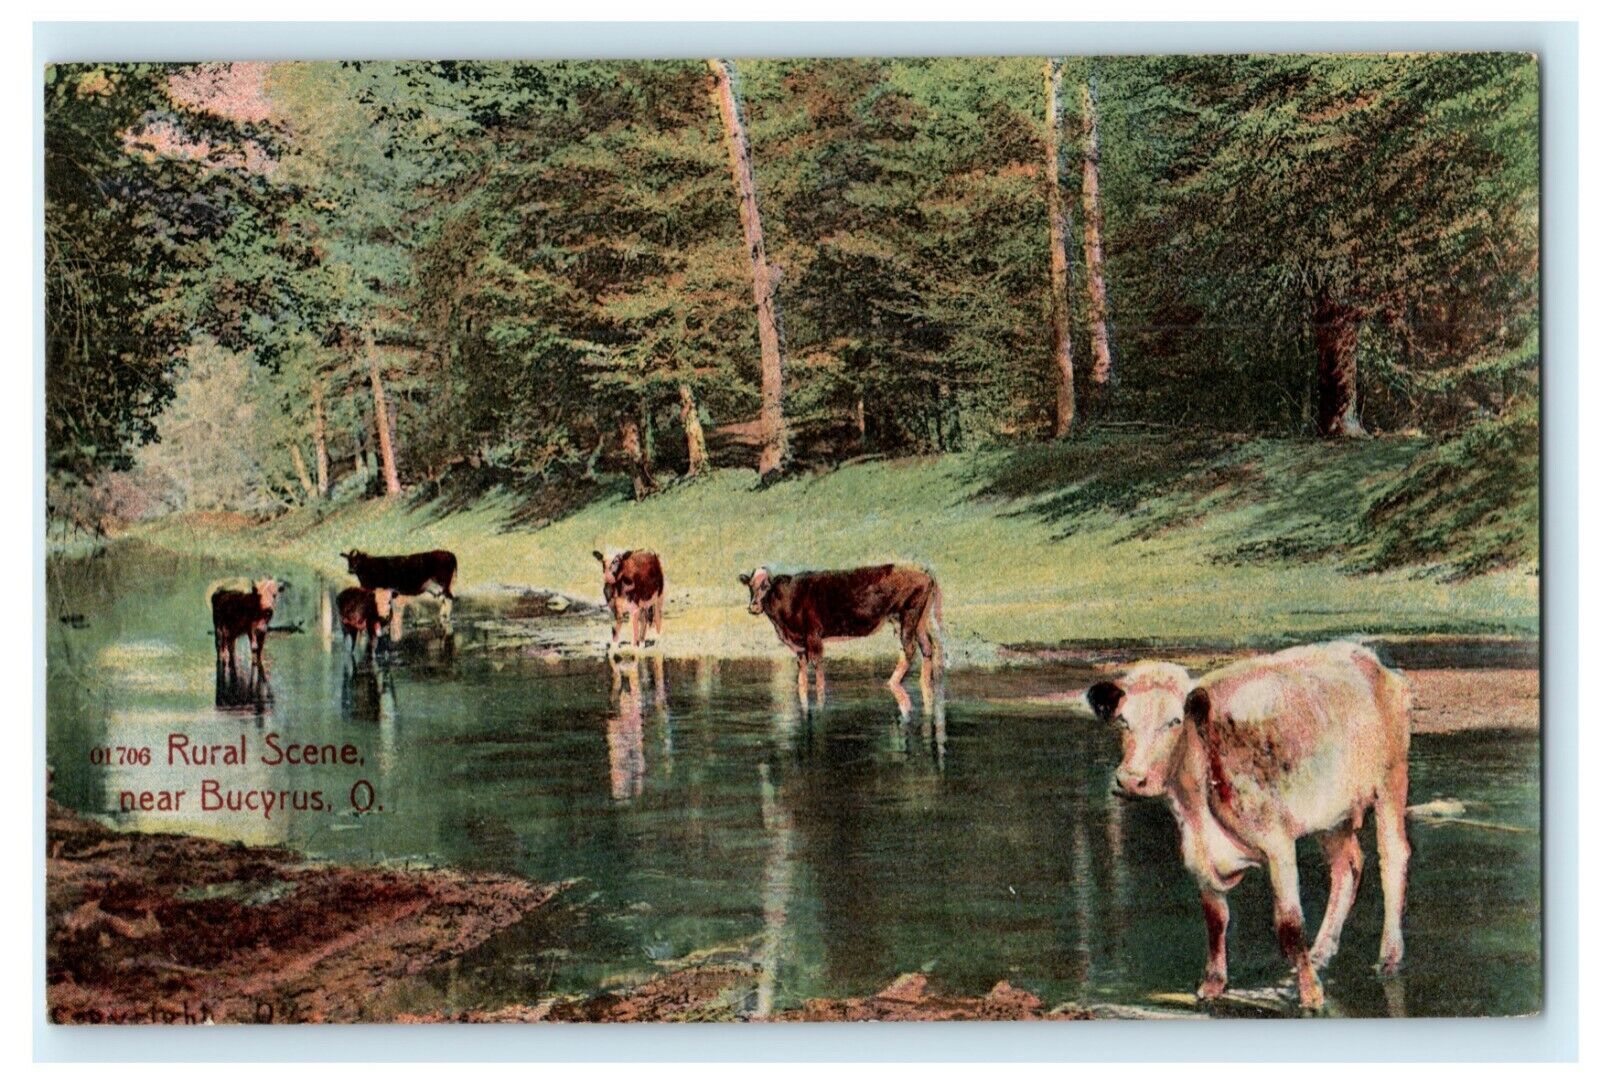 1908 Rural Scene Bucyrus Ohio OH Cows River Posted Antique Postcard